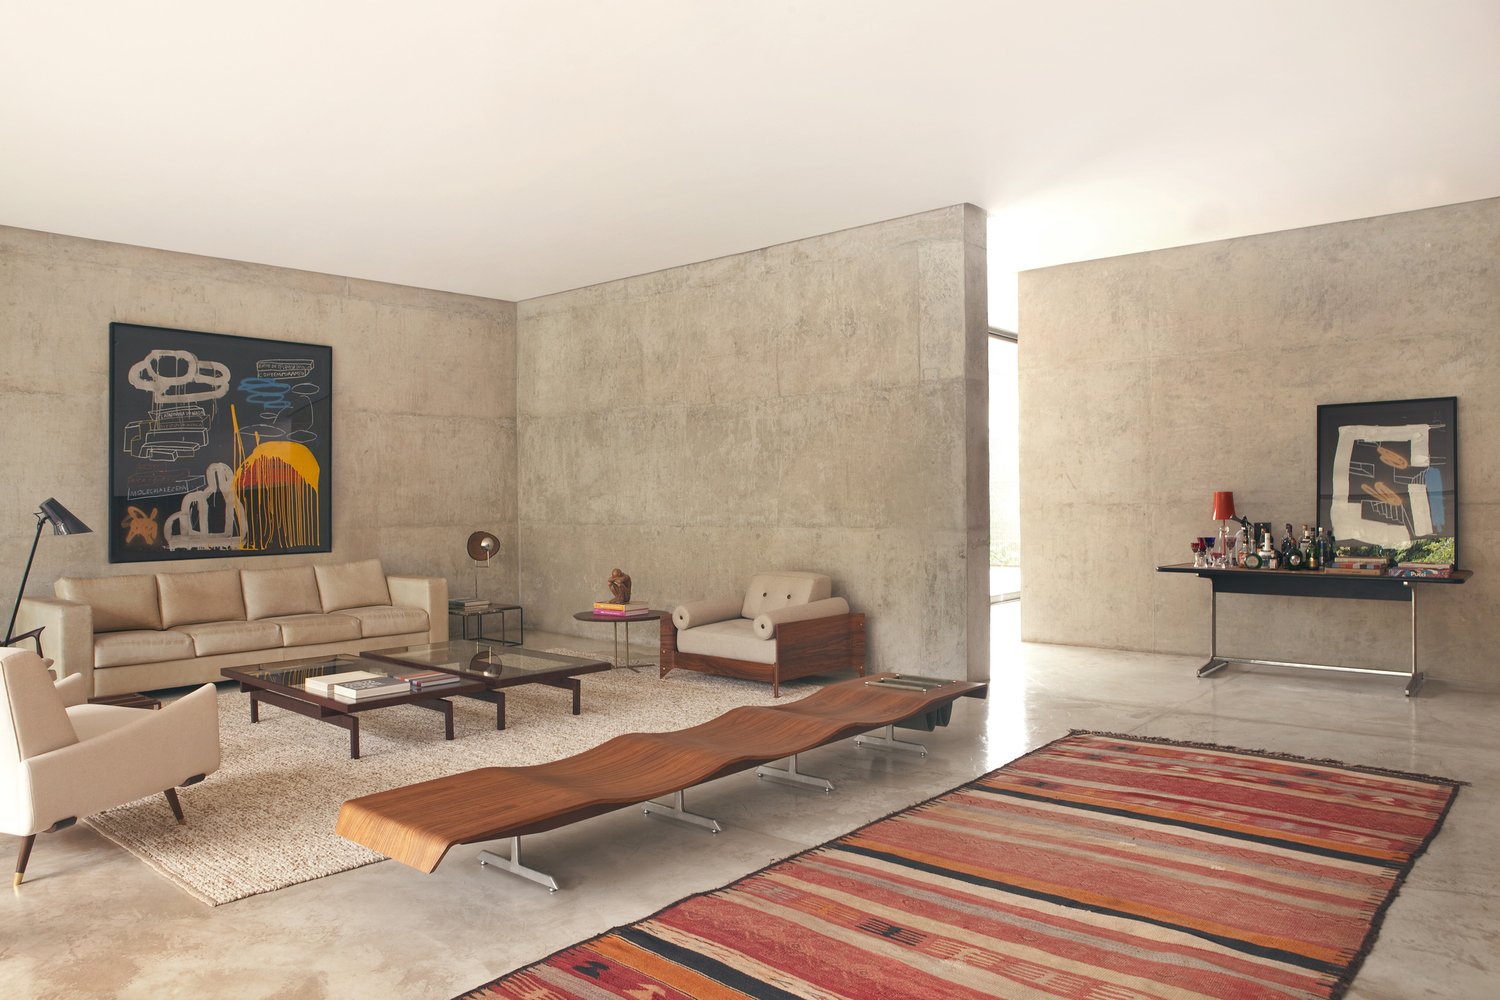 The living room features comfy neutral-colored furniture, a bold artwork piece and some rugs that soften the rough concrete look